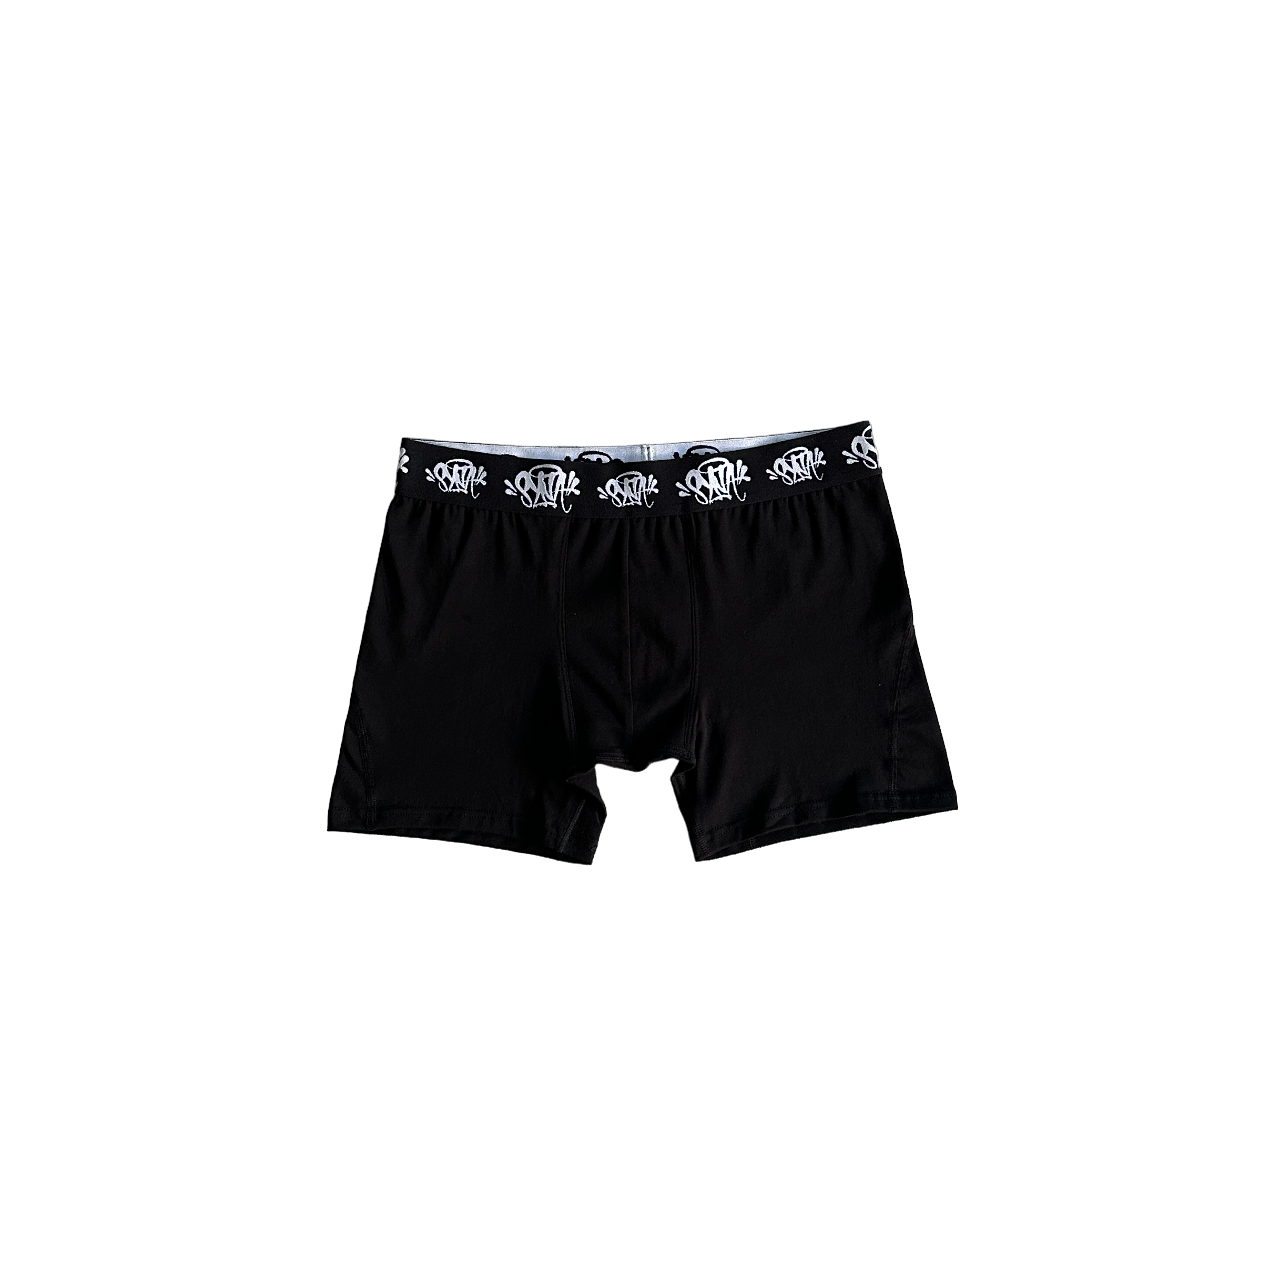 Syna Briefs Boxers (3 Pack) - BLACK/GREY/WHITE